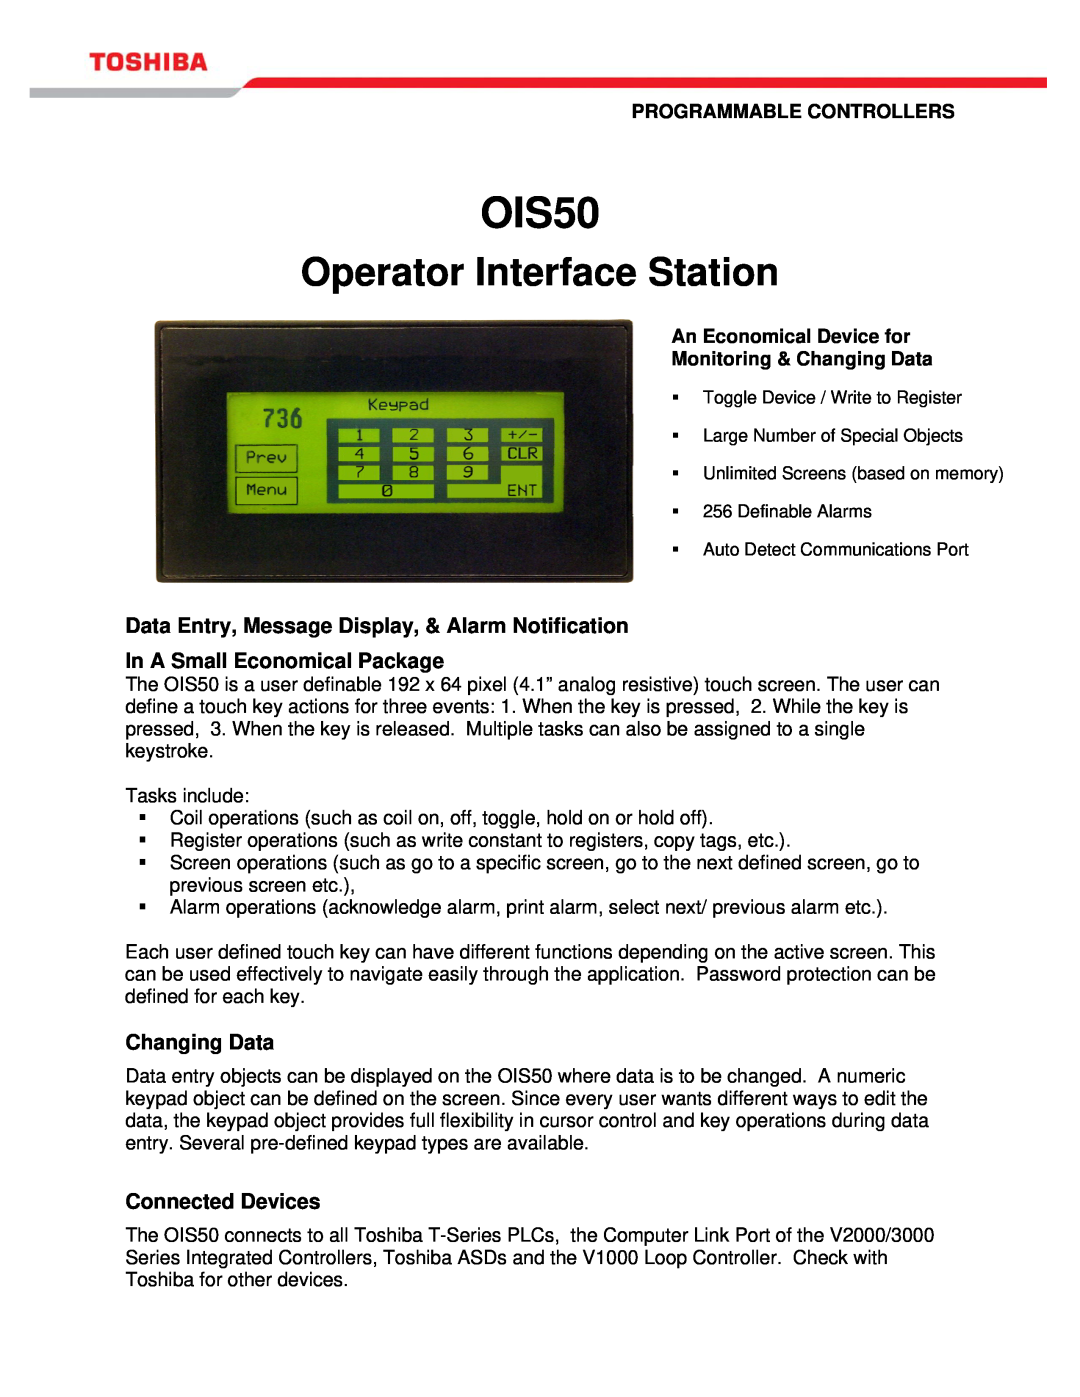 Toshiba OIS50 manual Data Entry, Message Display, & Alarm Notification, In A Small Economical Package, Changing Data 